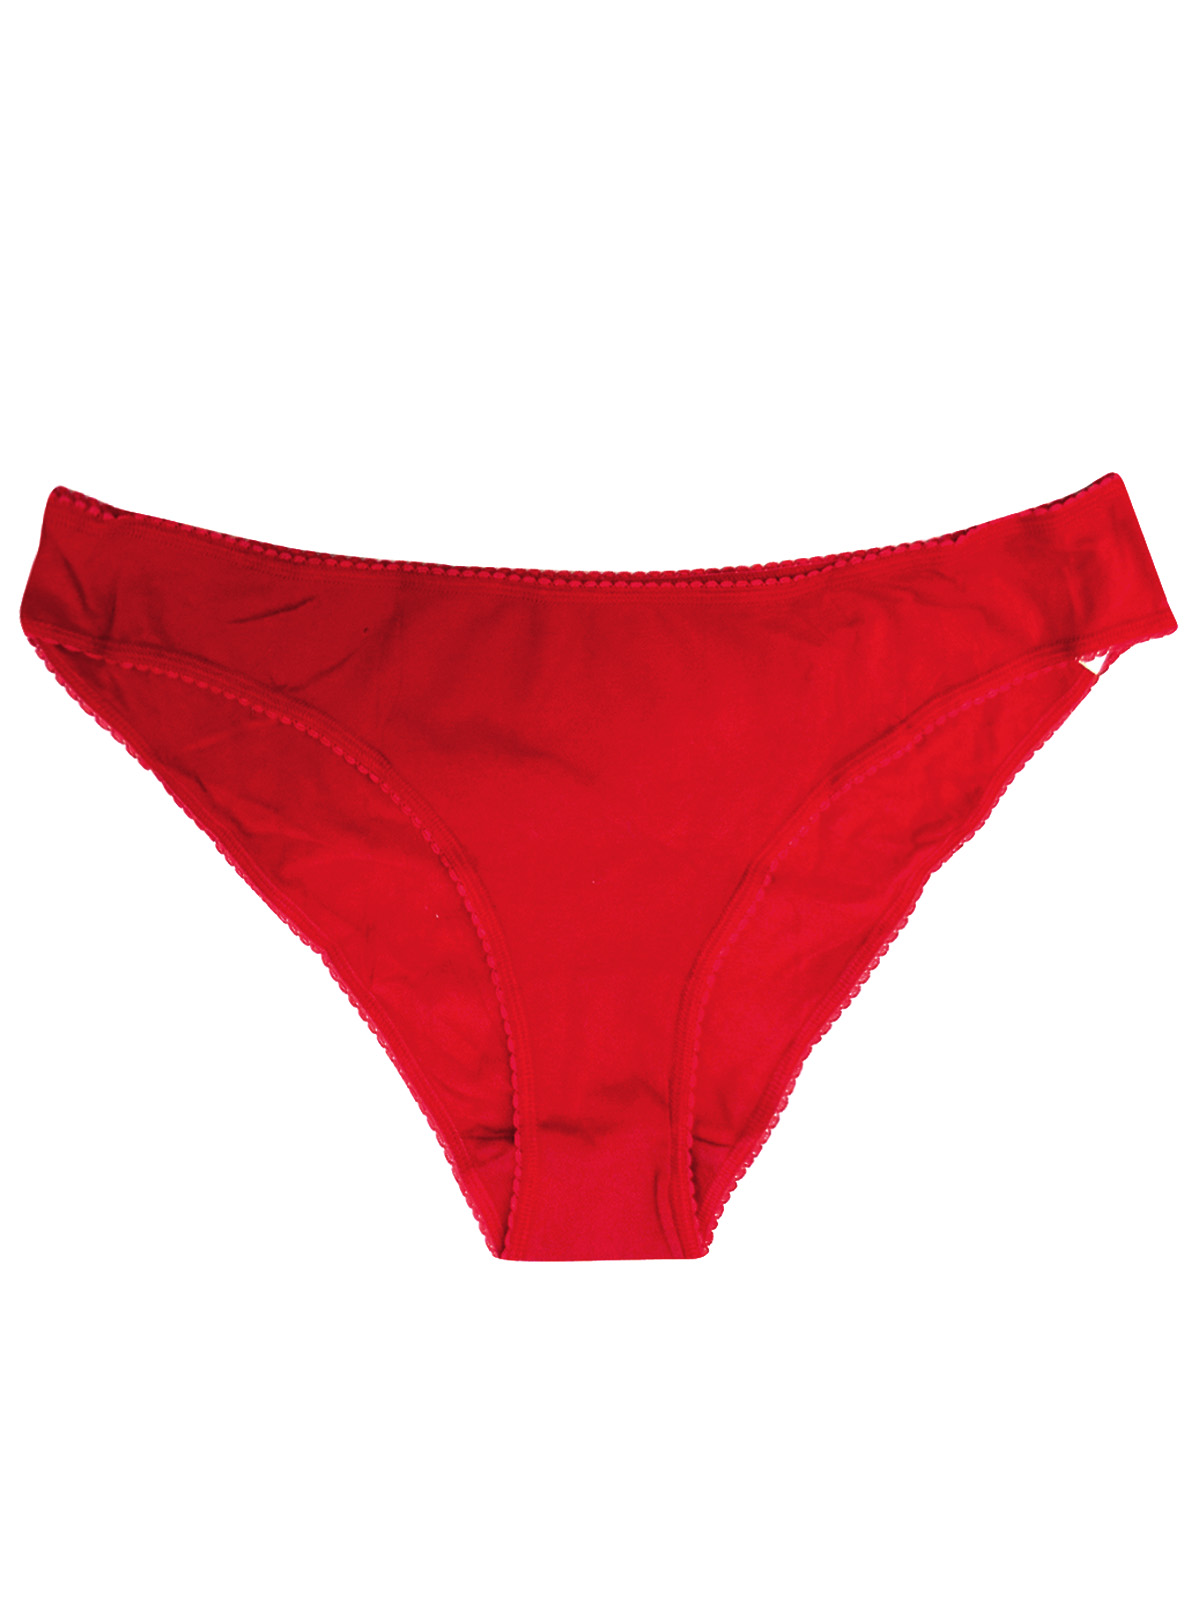 Marks and Spencer - - M&5 RED Cotton Rich Brazilian Knickers - Plus ...